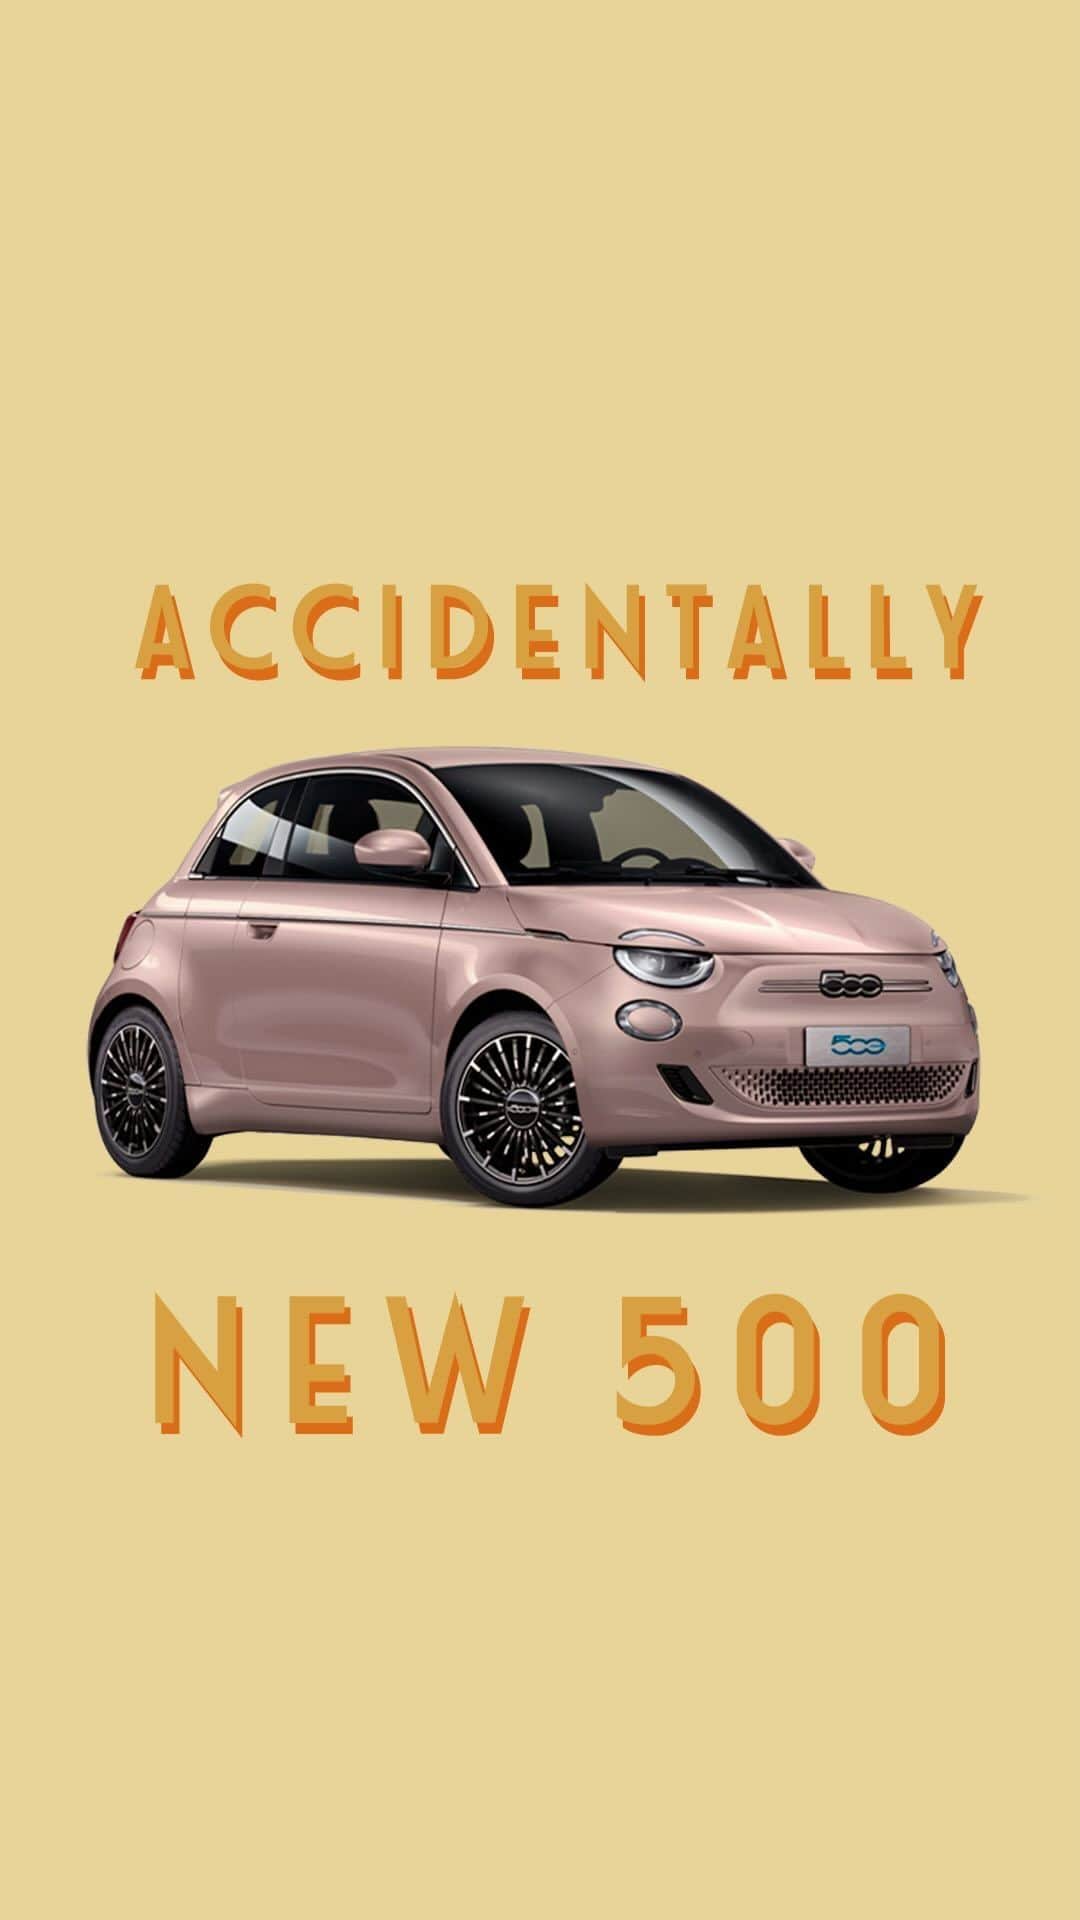 Fiat のインスタグラム：「Starting trends has always been our mood, remember Dolce Vita by Design? Accidentally New 500 before the hype.」